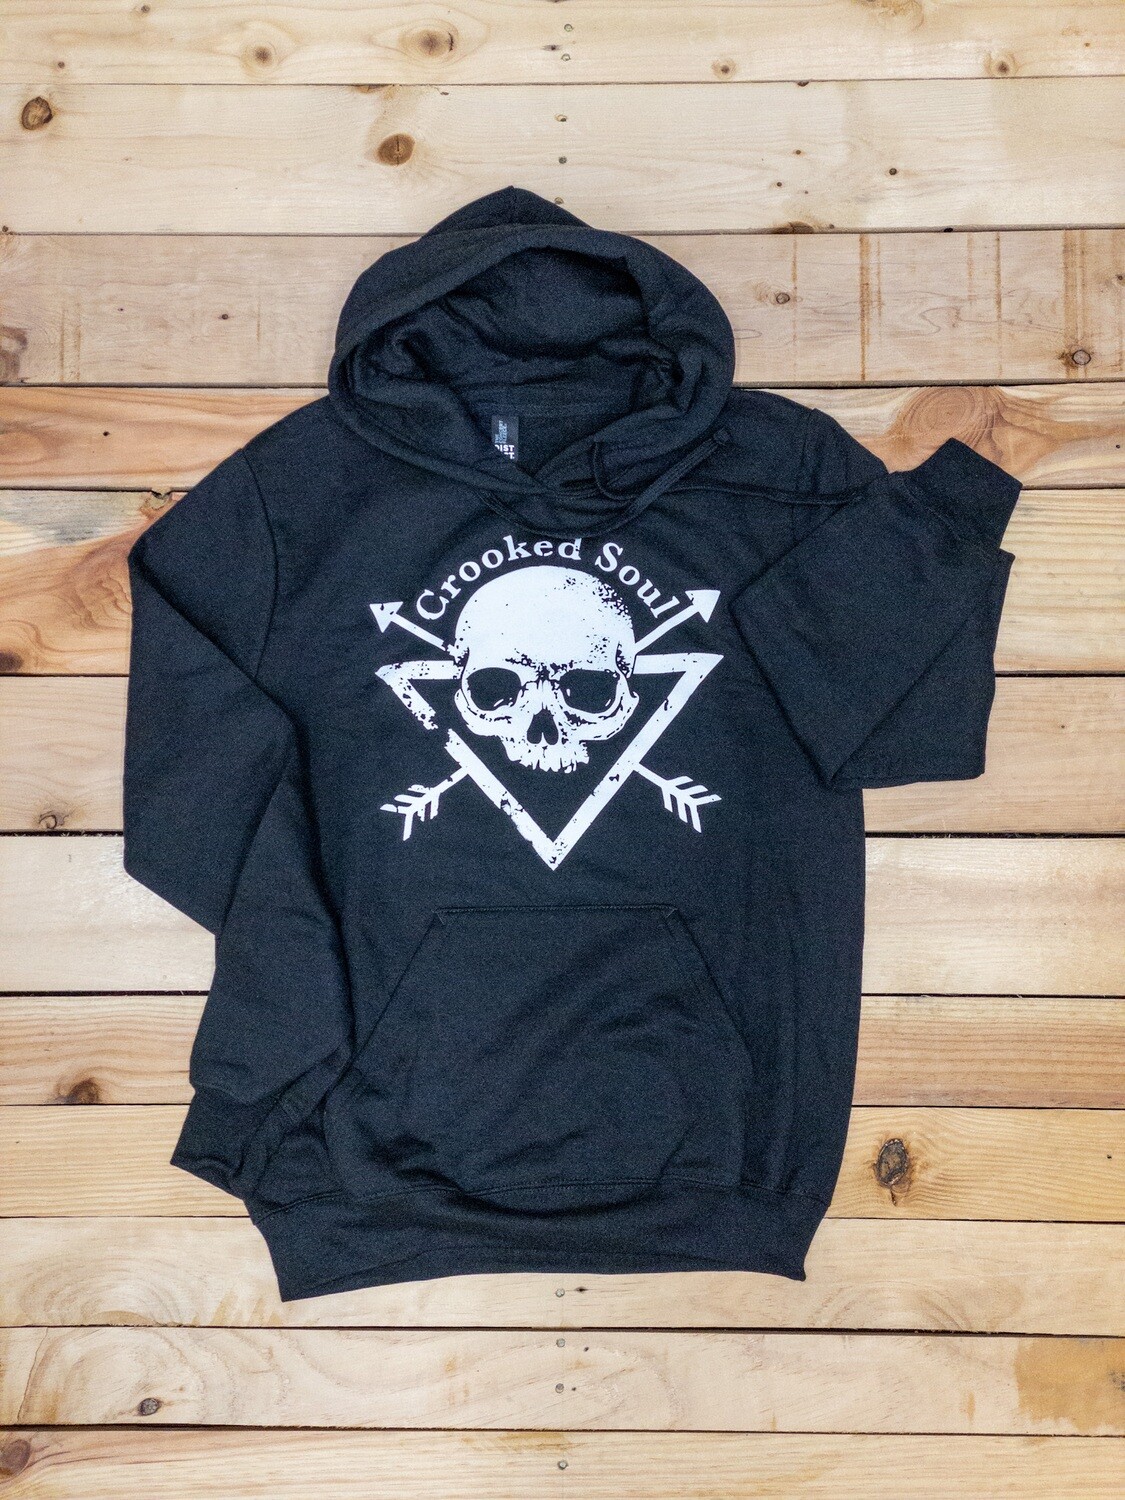 Crooked Soul Hoodie Black Small